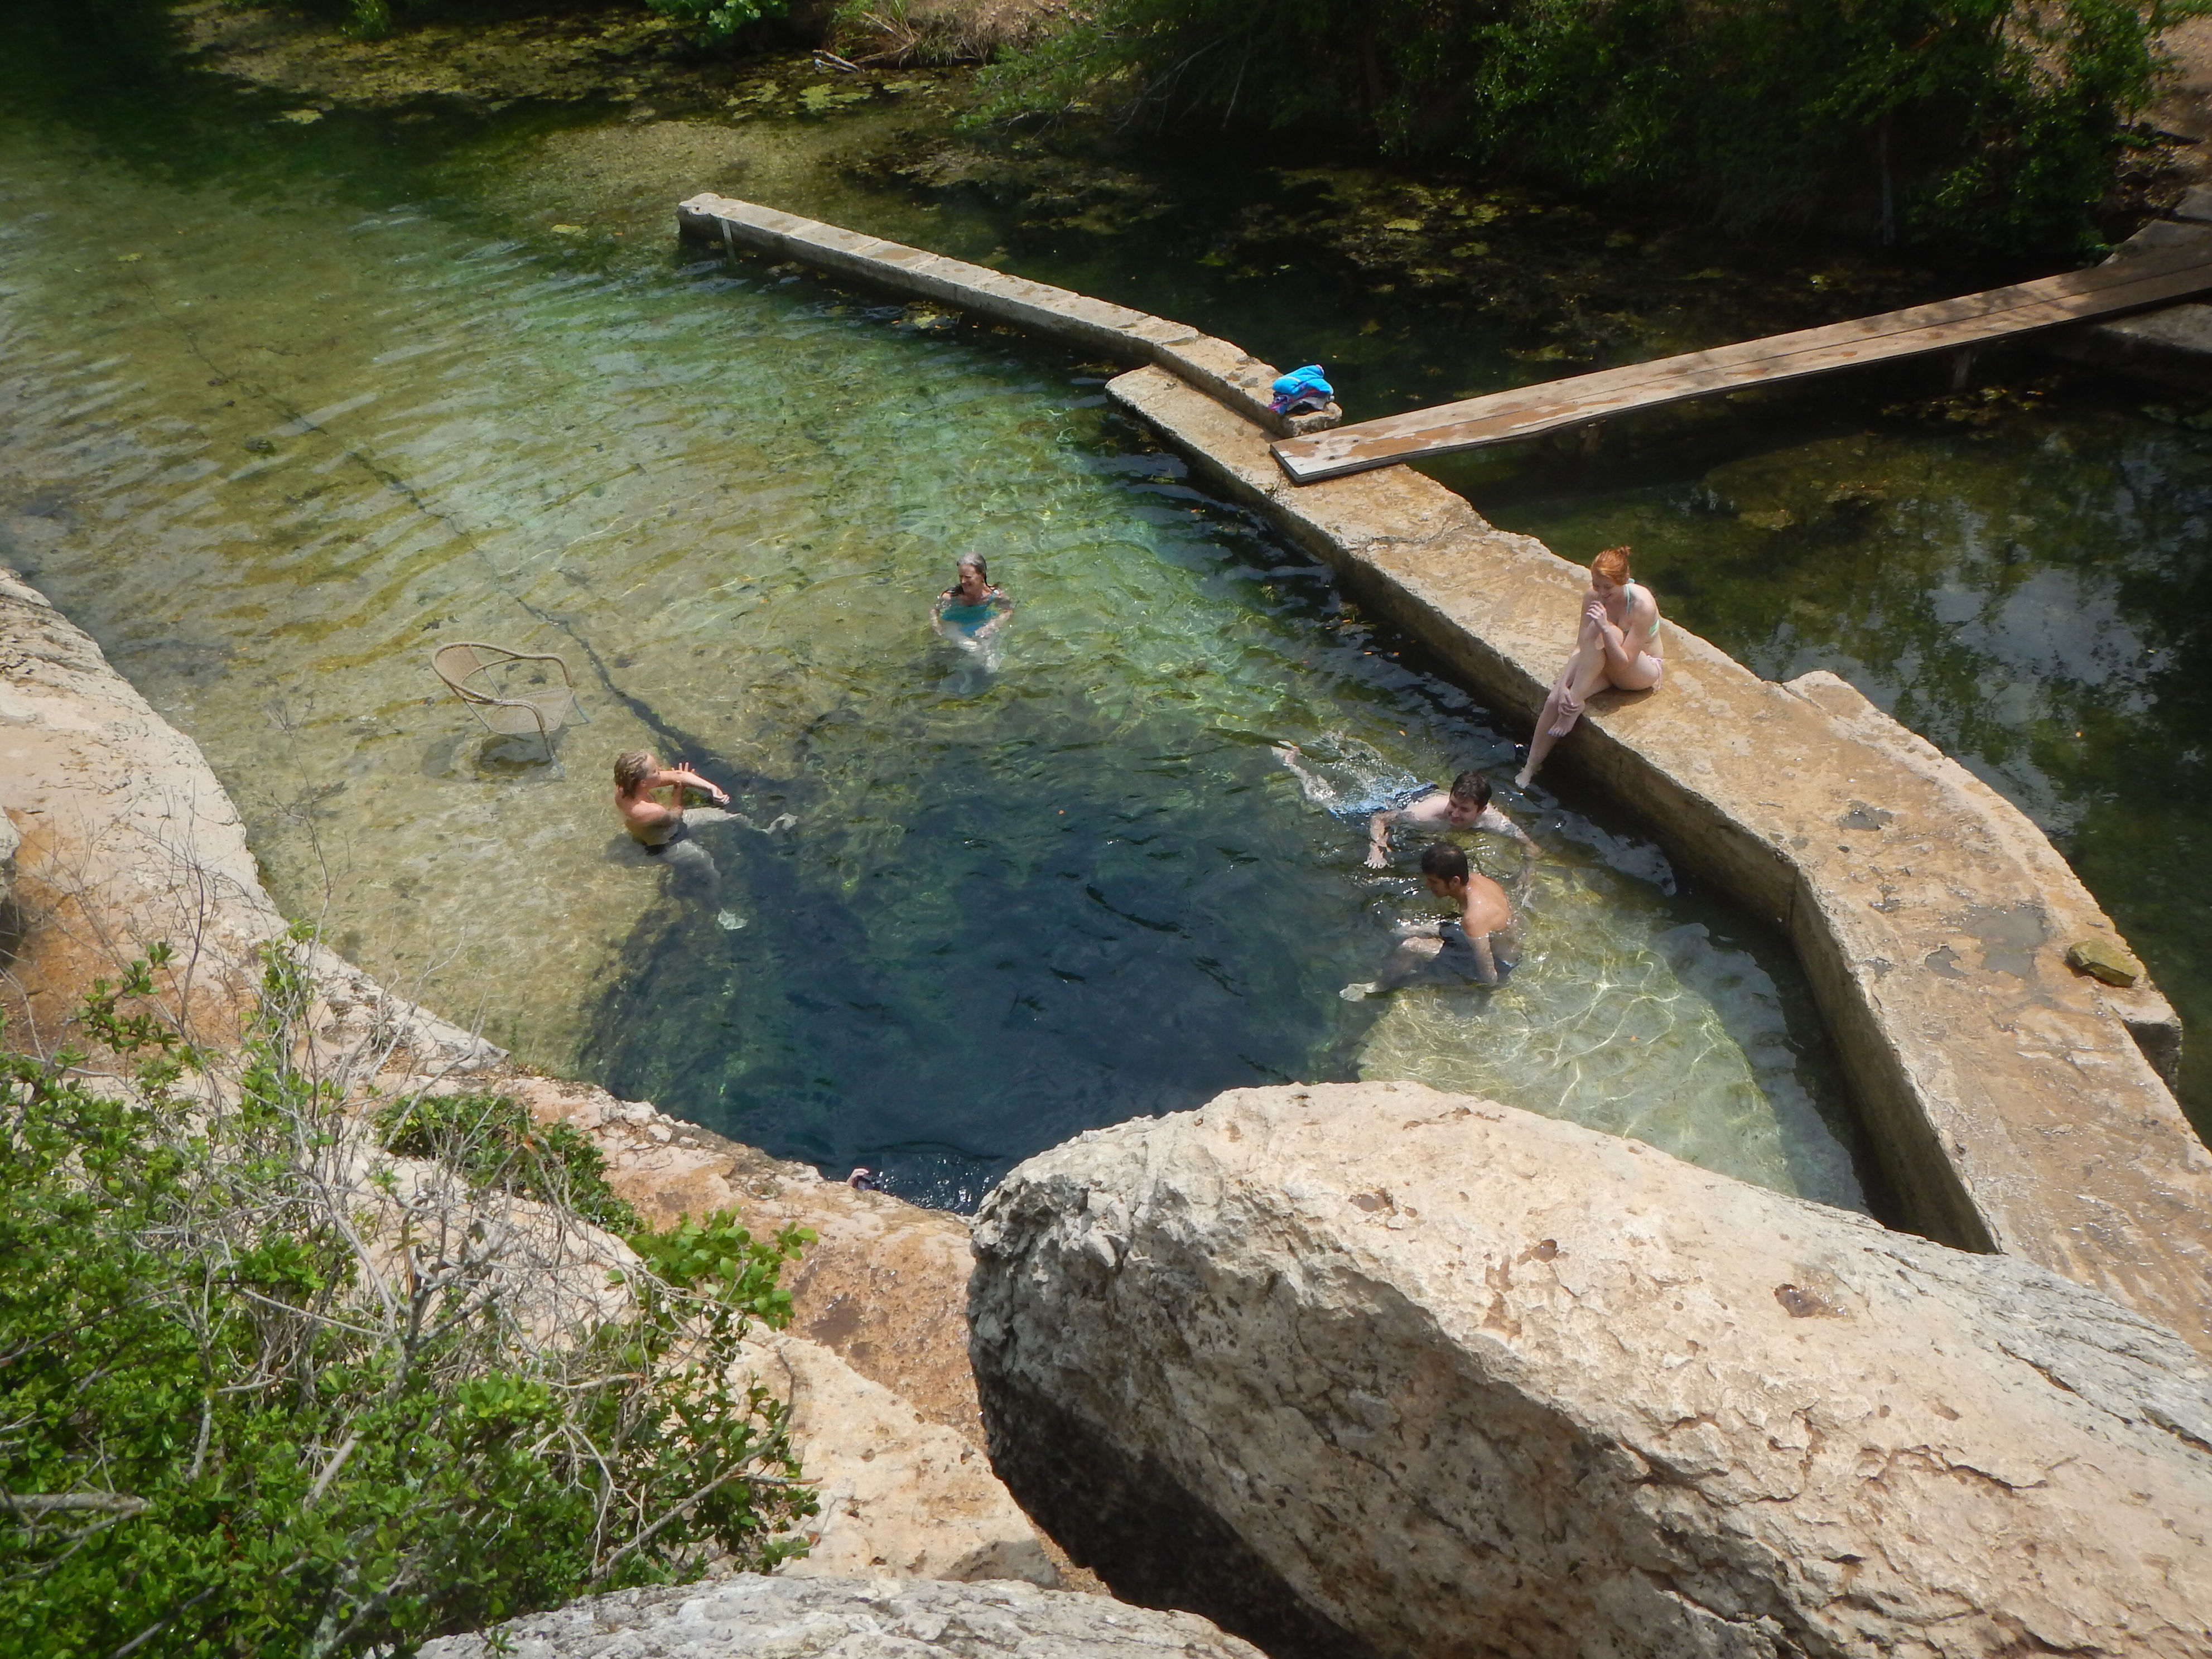 <p class="p1"><span>They say everything’s bigger in Texas, and <a href="http://www.visitwimberley.com/jacobswell/index.shtml" rel="noreferrer noopener"><span>Jacob’s Well in Wimberley</span></a> is no different. The state’s second-longest fully submerged cave measures nearly a mile in length and reaches 137 feet in depth. The site is open to the public for swimming from May through October. </span></p>